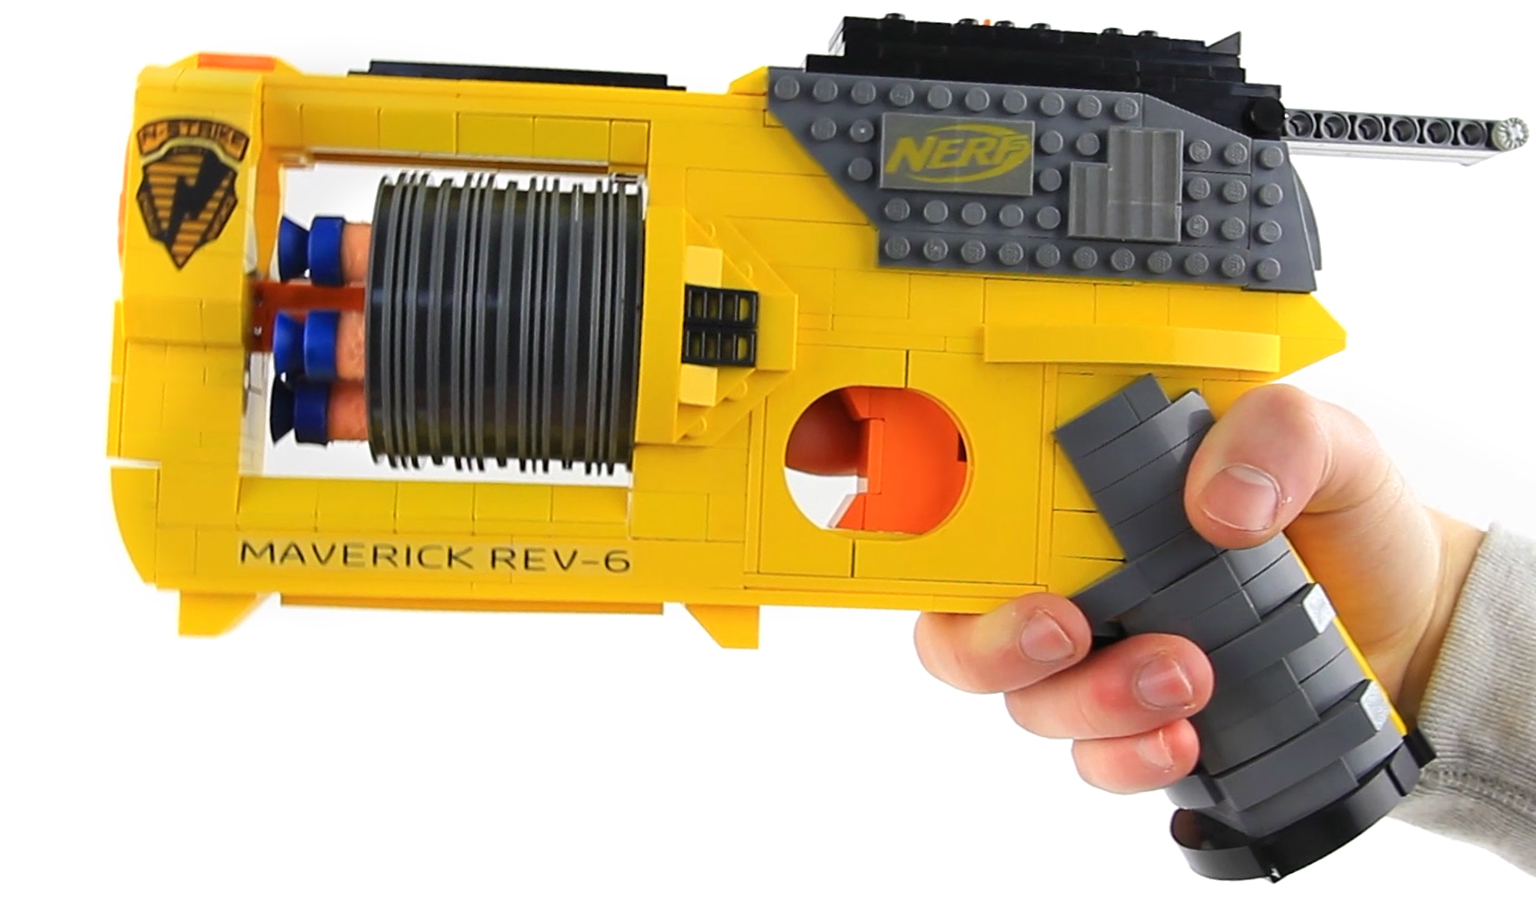 You Can Build A Working Nerf Blaster Using LEGO